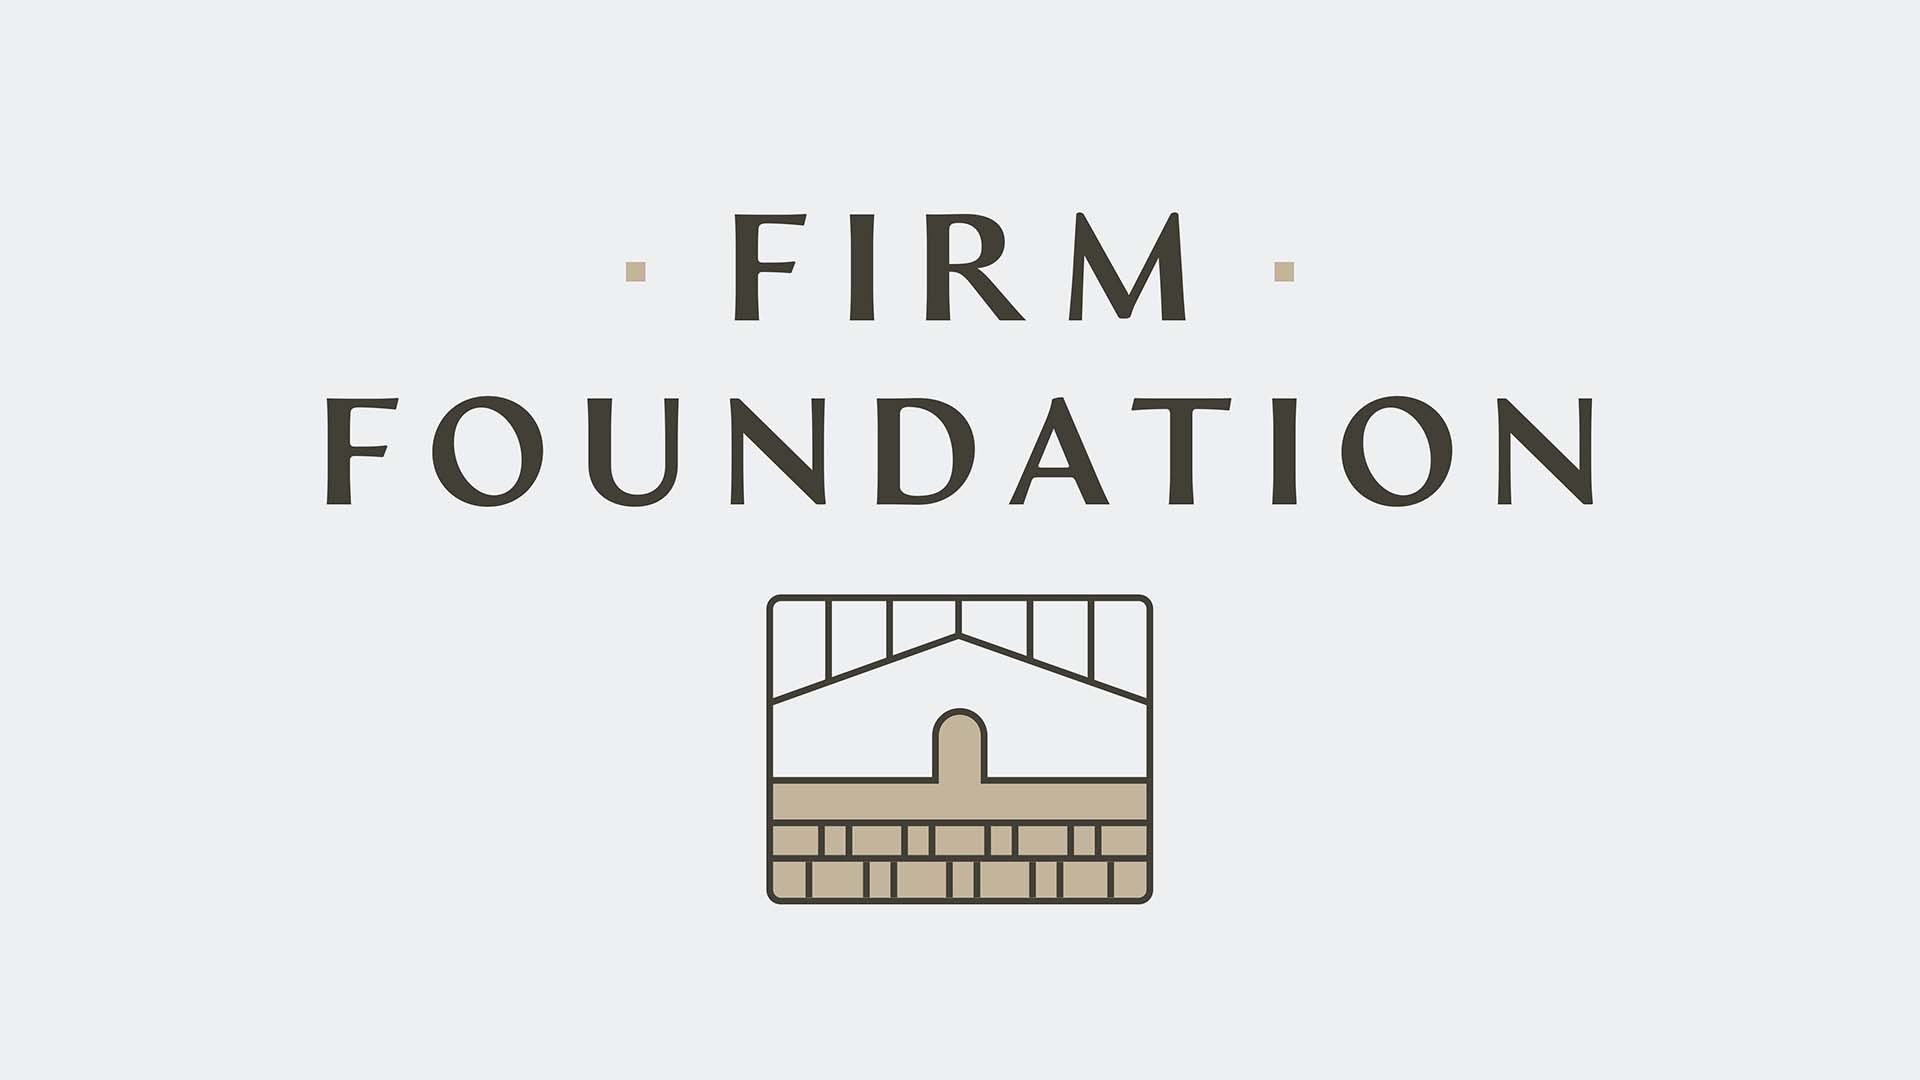 "Firm Foundation" Message Series